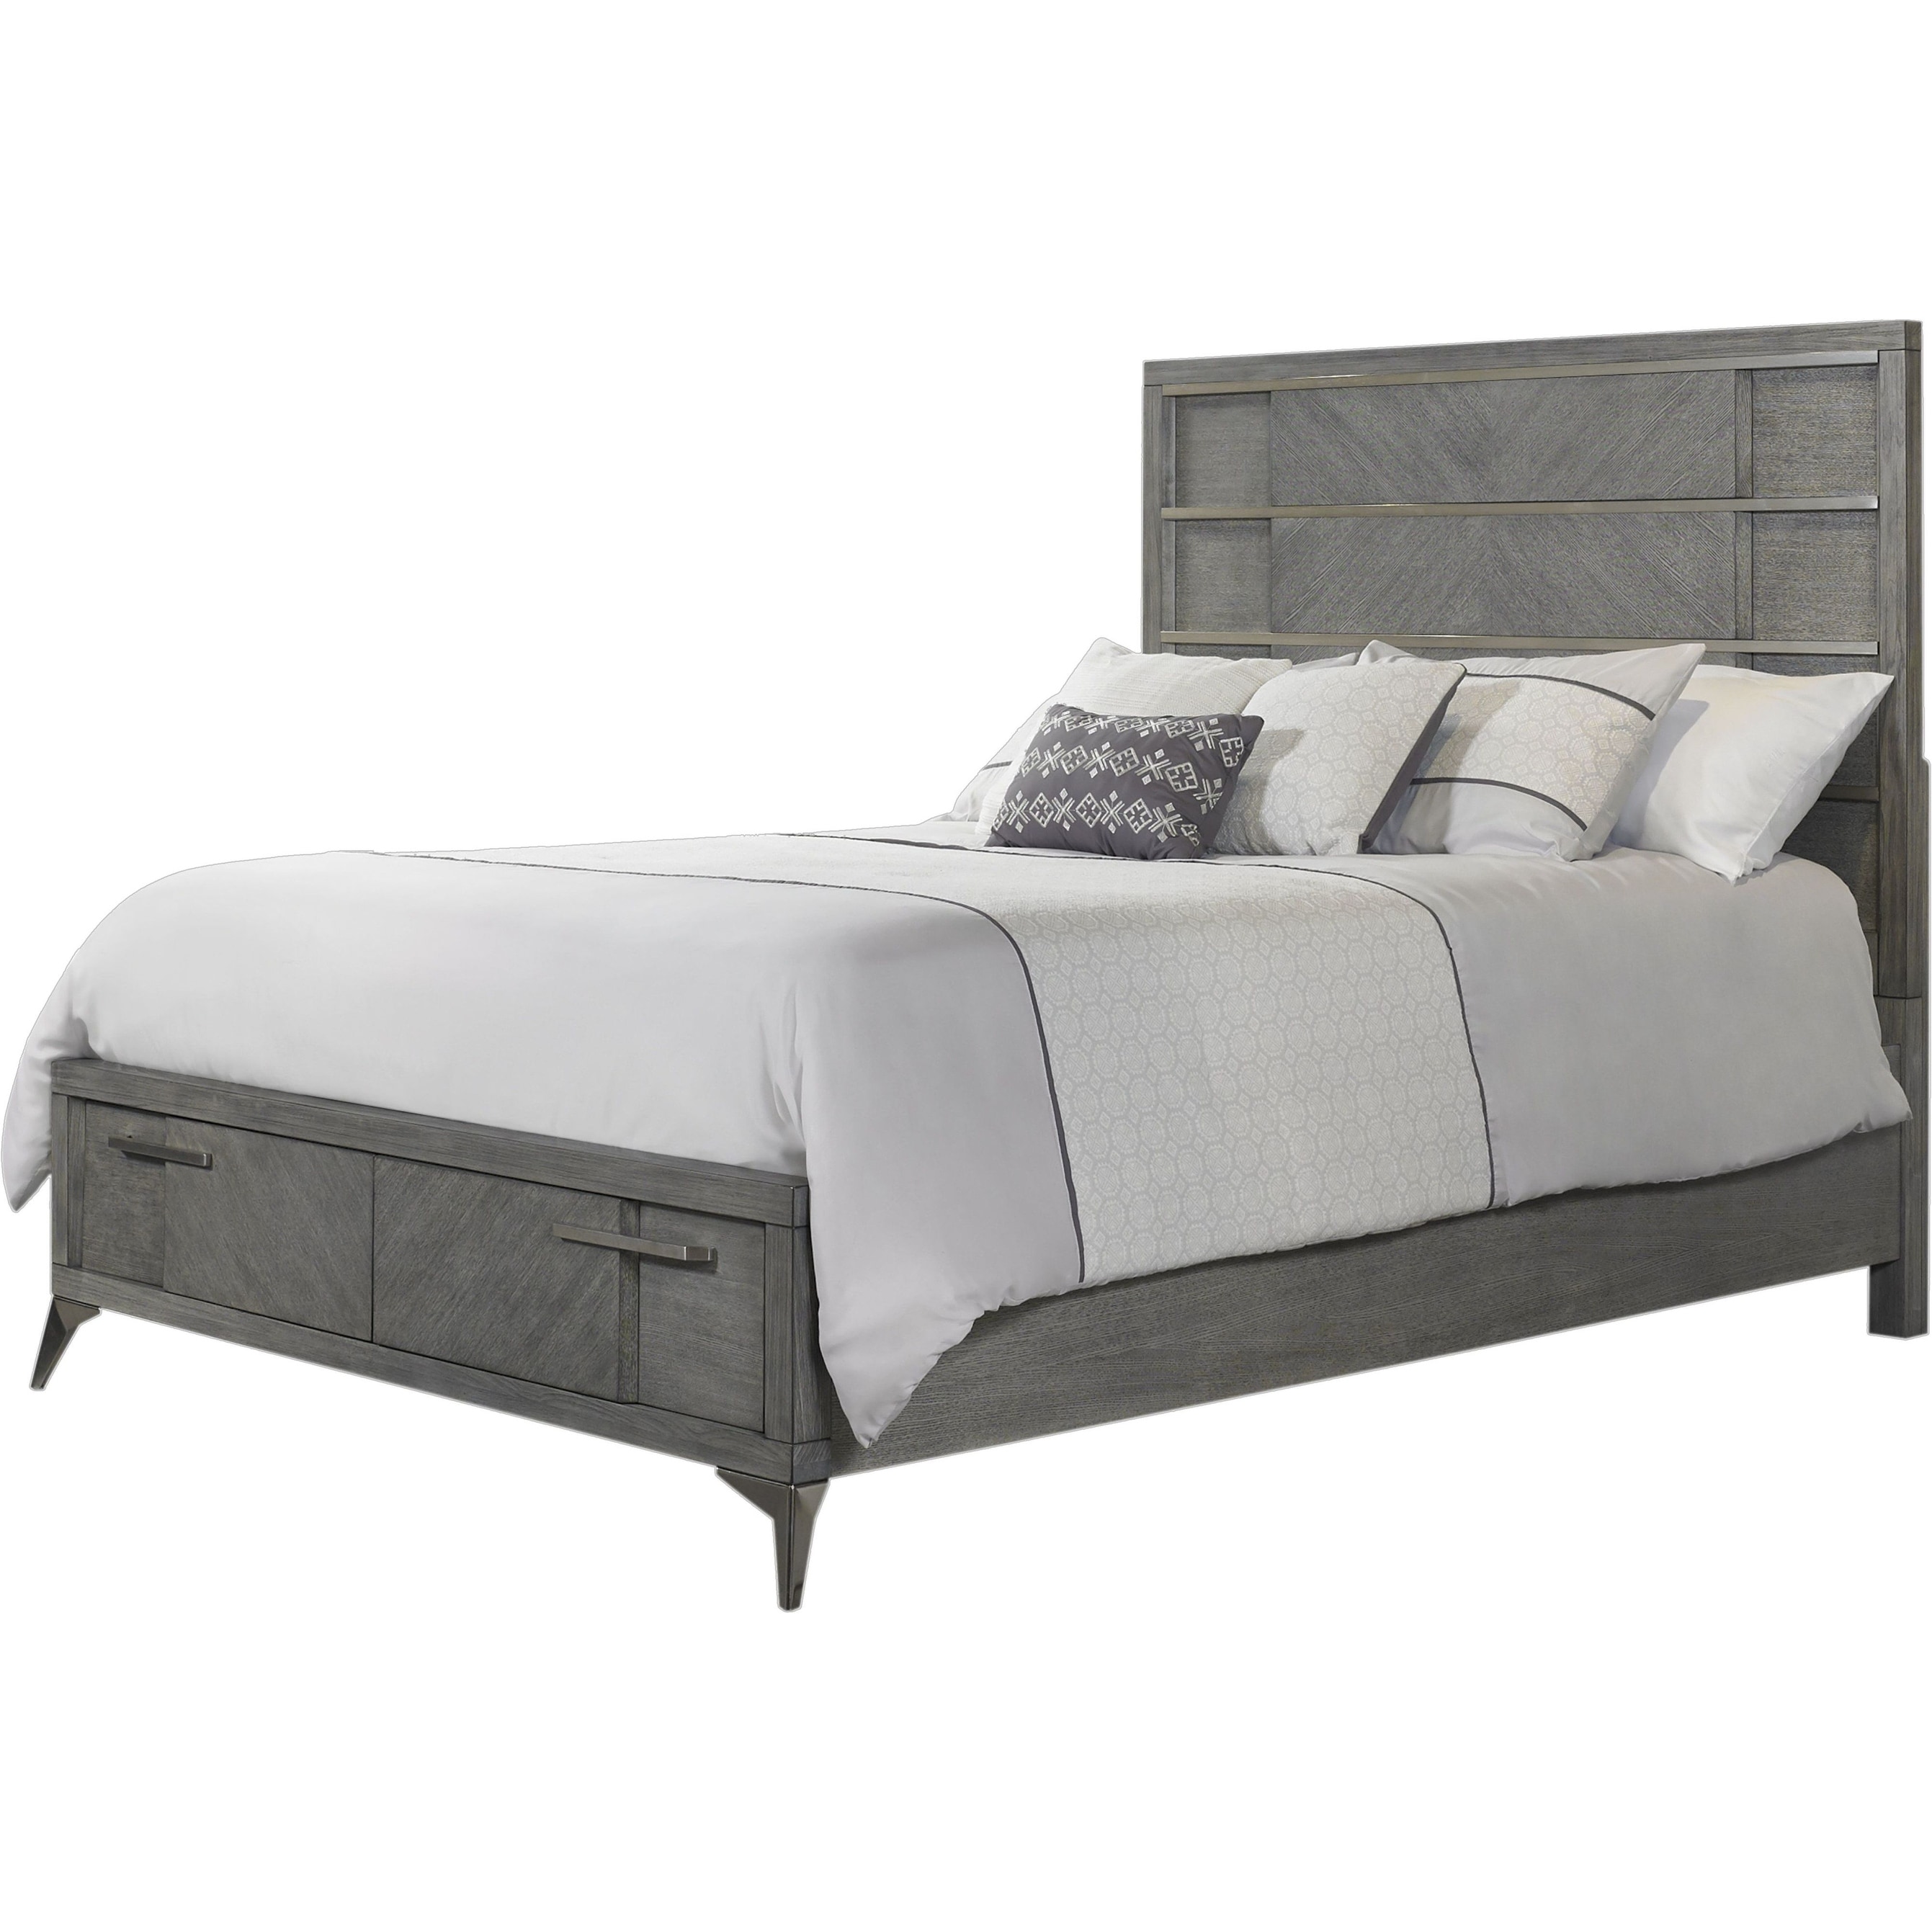 Aries Bed With Footboard Storage